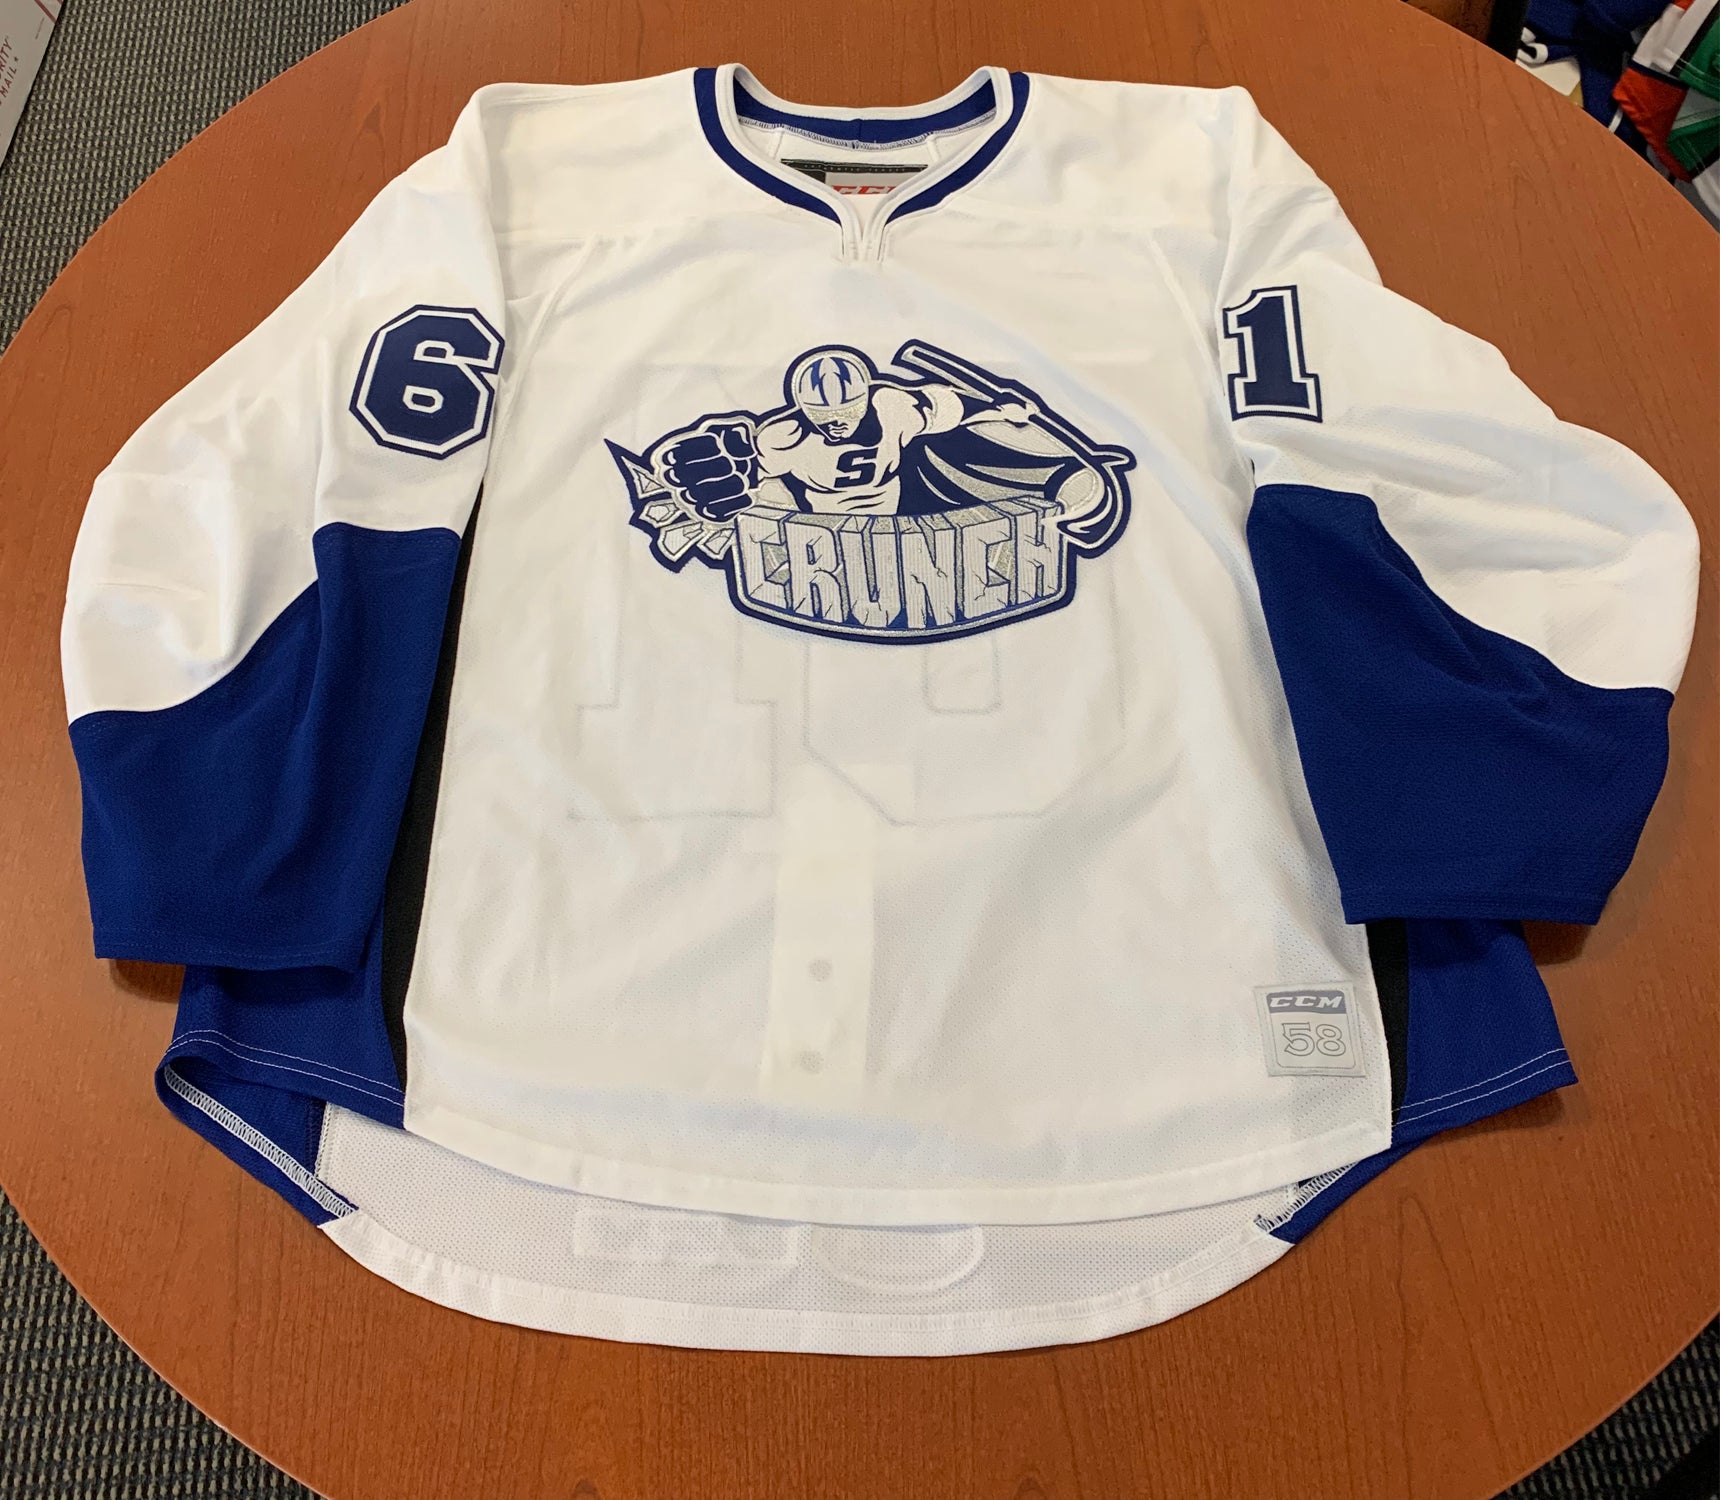 Jersey numbers have been a wide-ranging fashion variable for the Syracuse  Crunch 